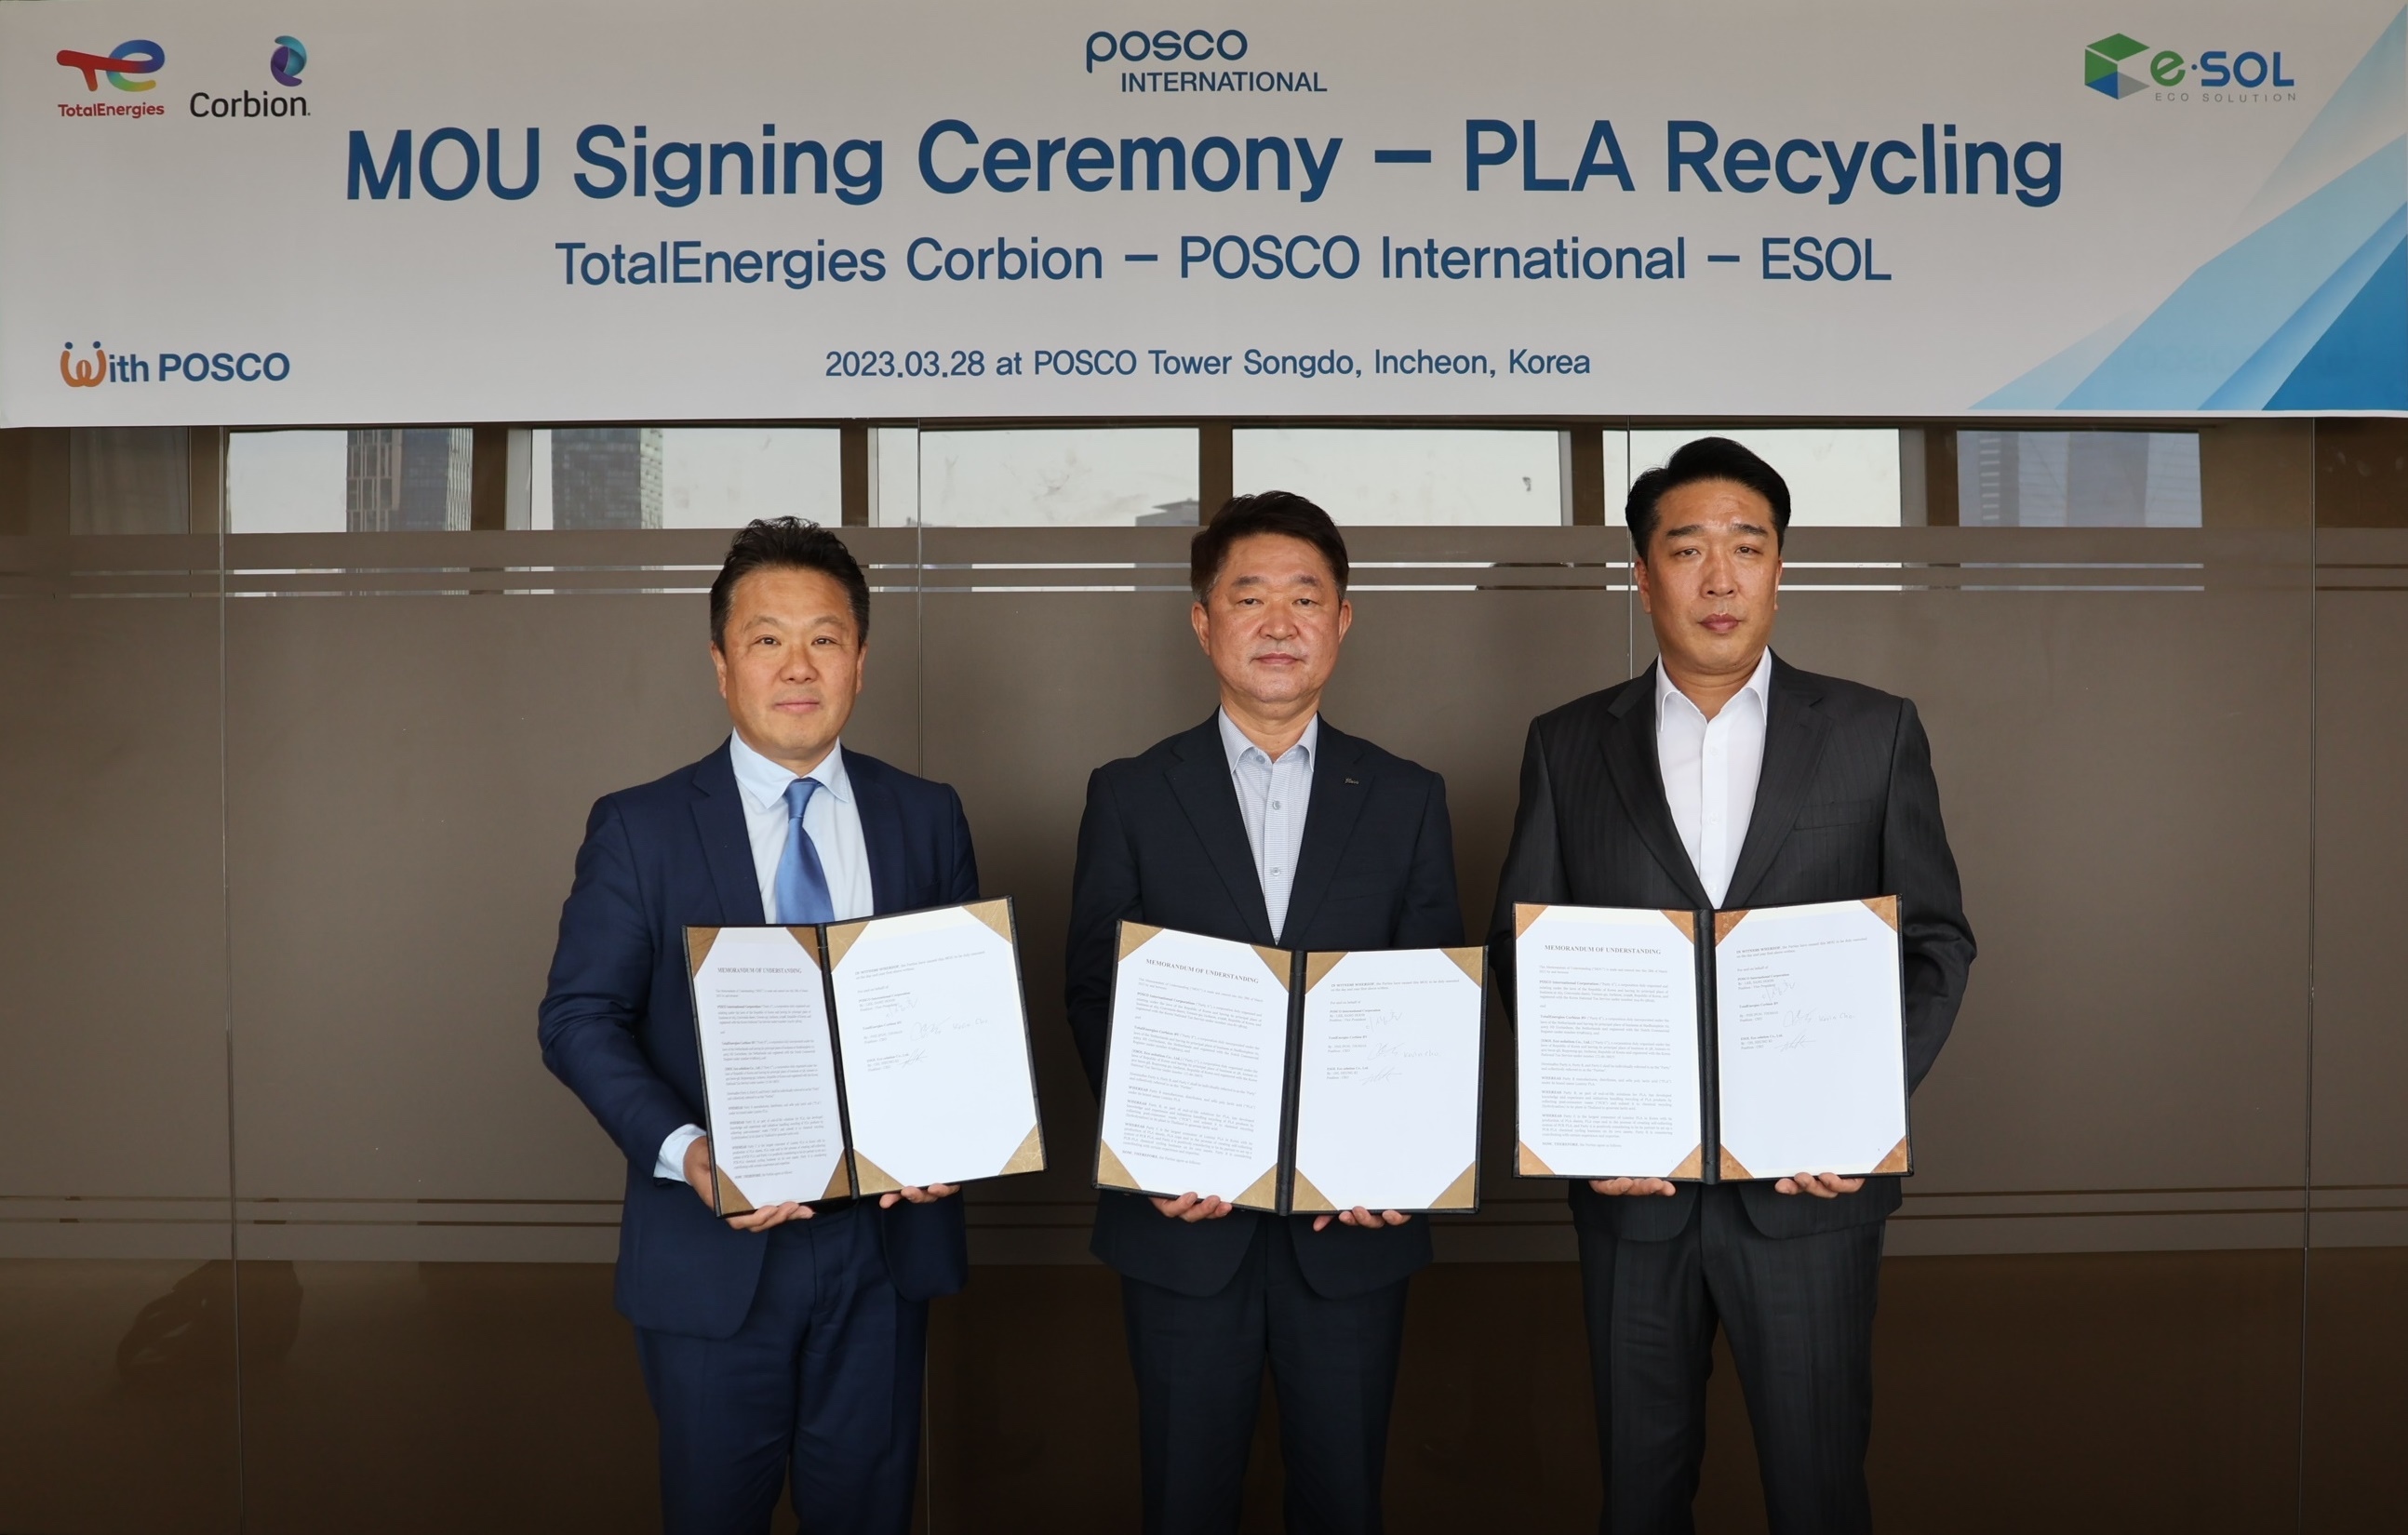 Kevin Cho, head of TotalEnergies Corbion Korea; Lee Sang-hoon, executive vice president at Posco International and Oh Hong-ki, president of Esol, (from left to right) pose for a photo during a signing ceremony on bioplastic recycling on Friday